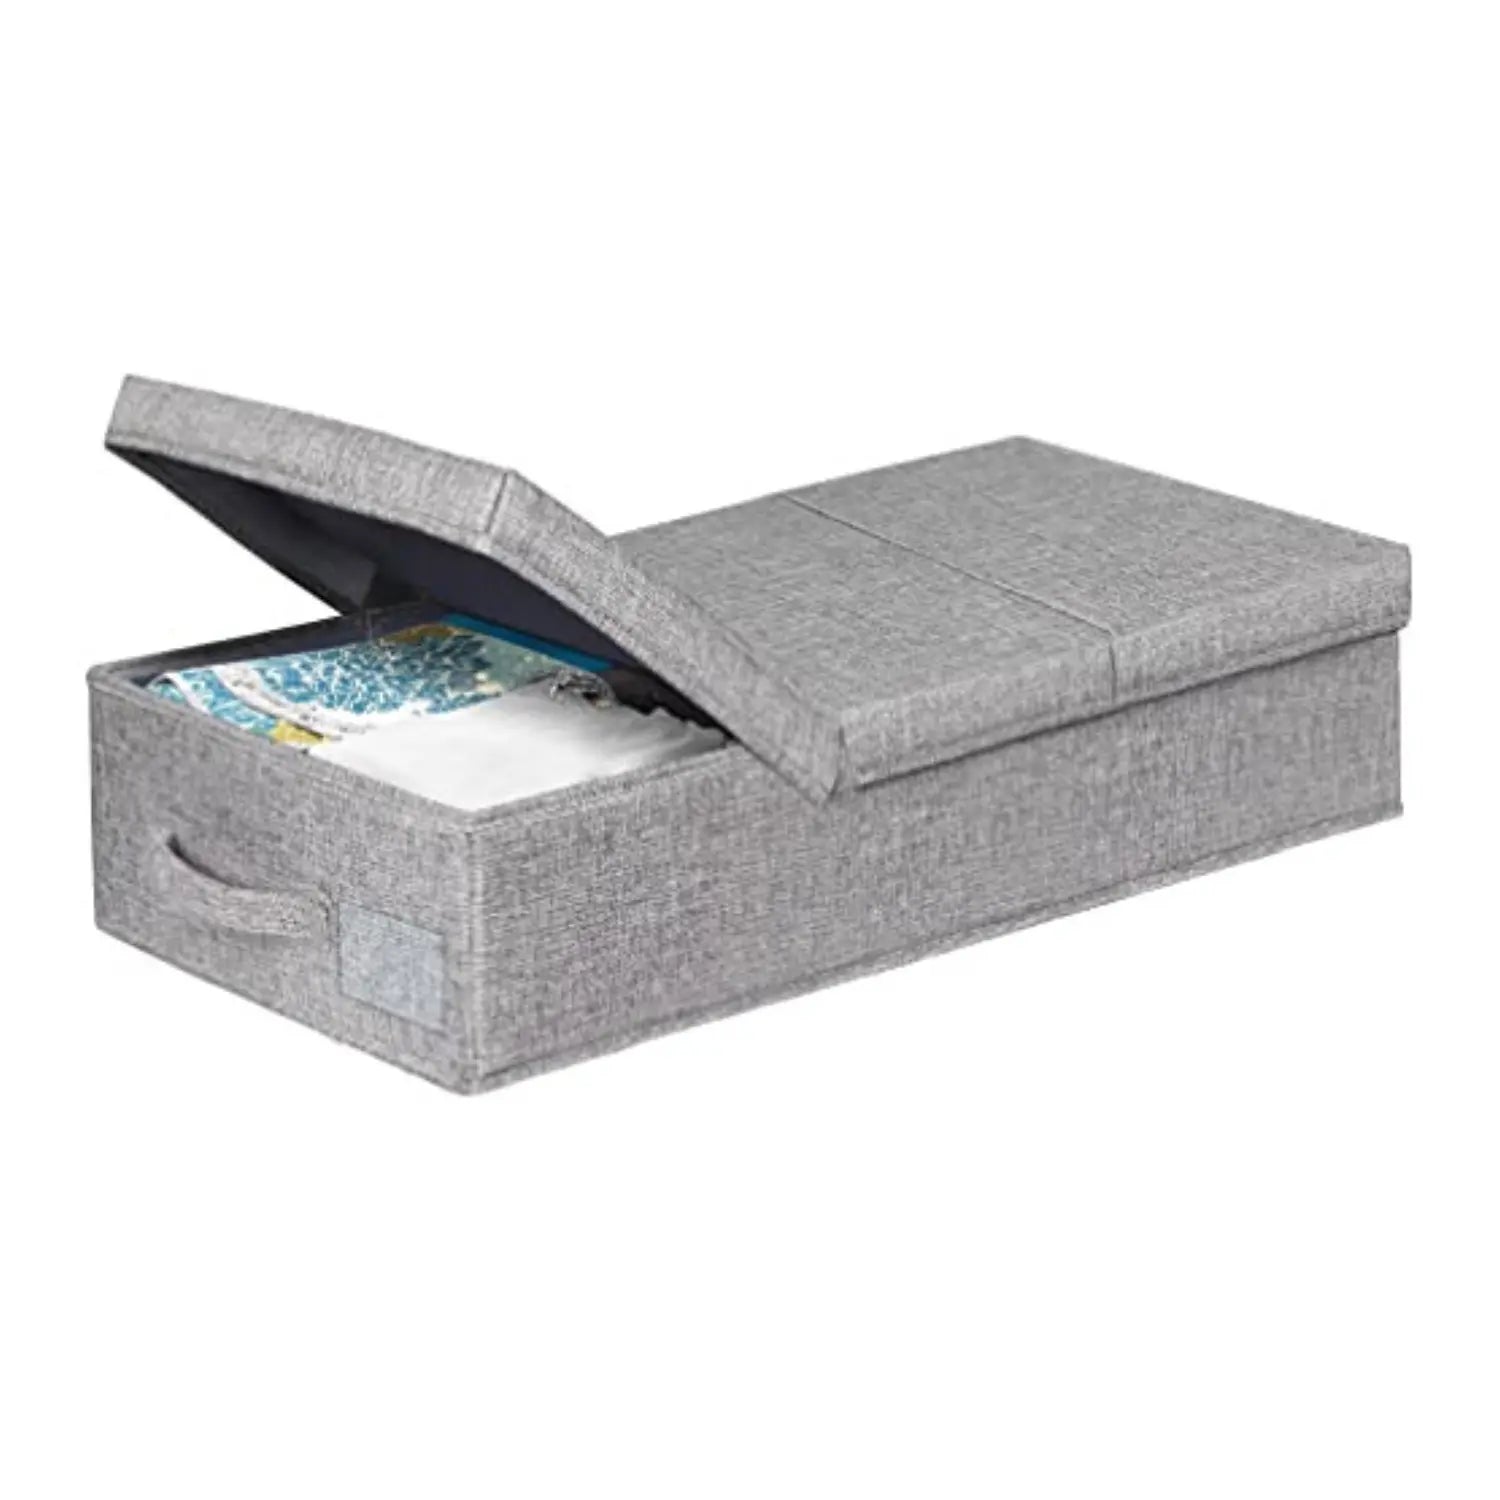 Foldable Under Bed Storage Box with Reinforced Handle